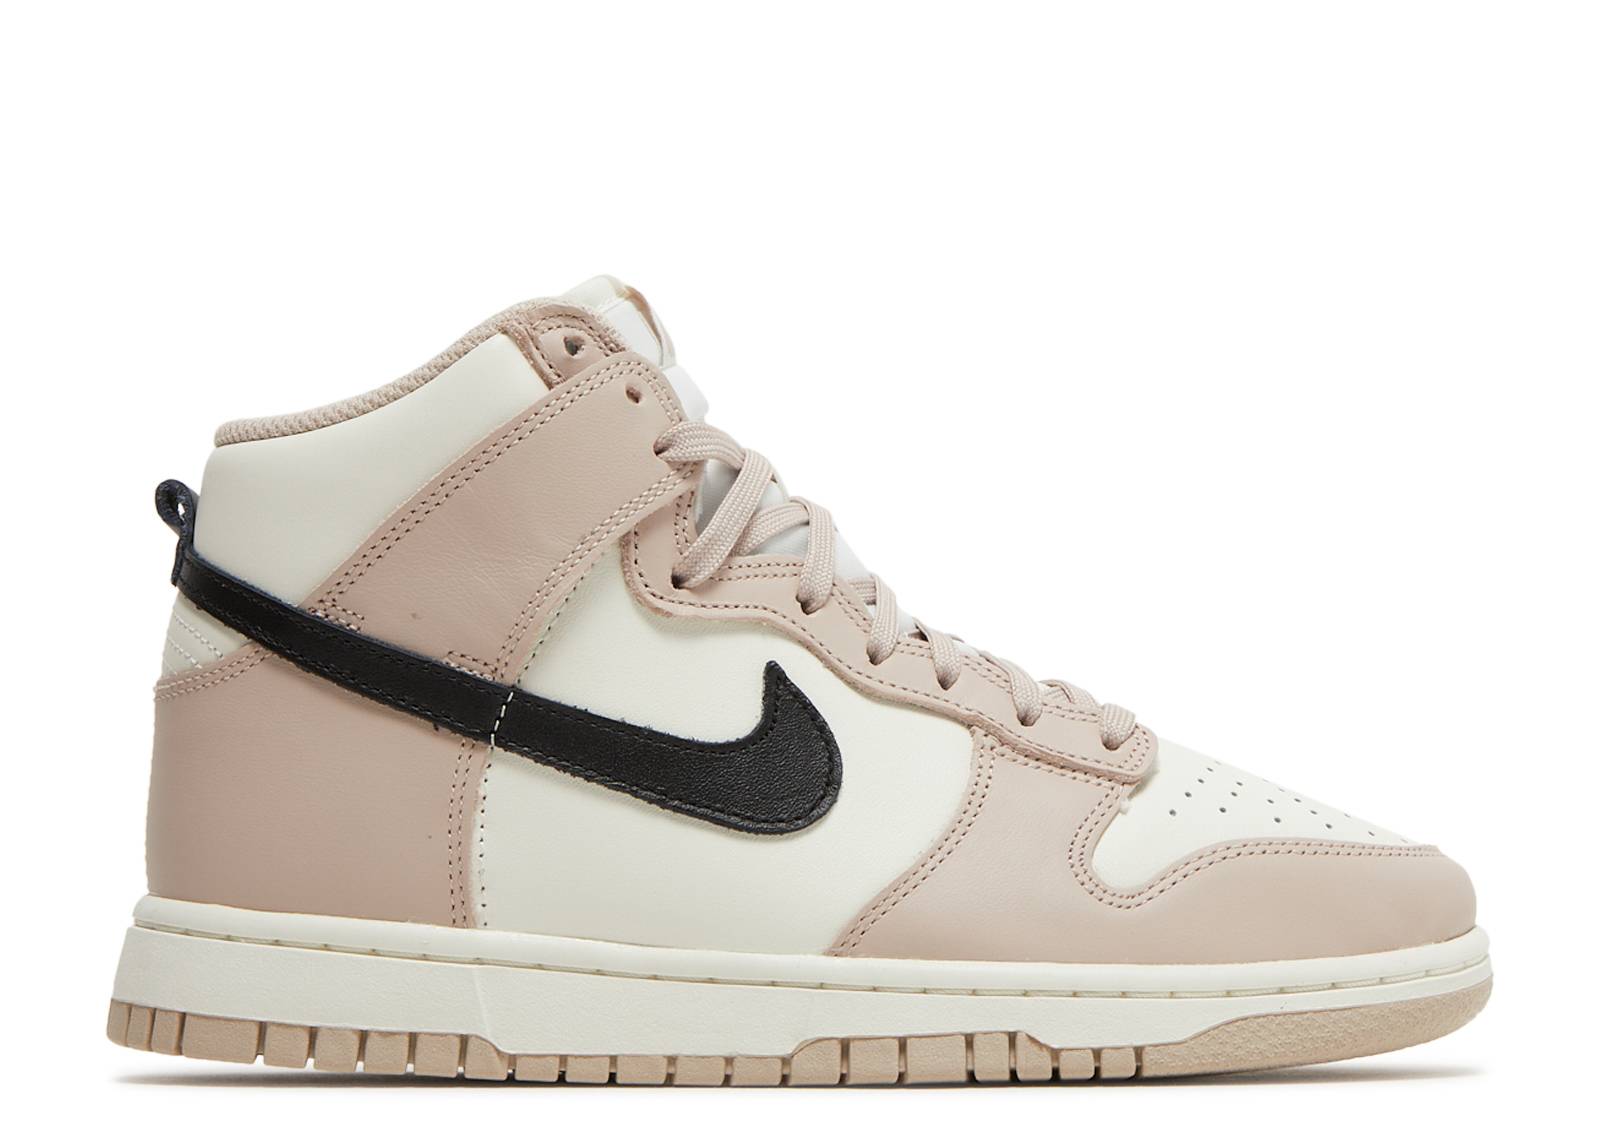 Wmns Dunk High Fossil Stone